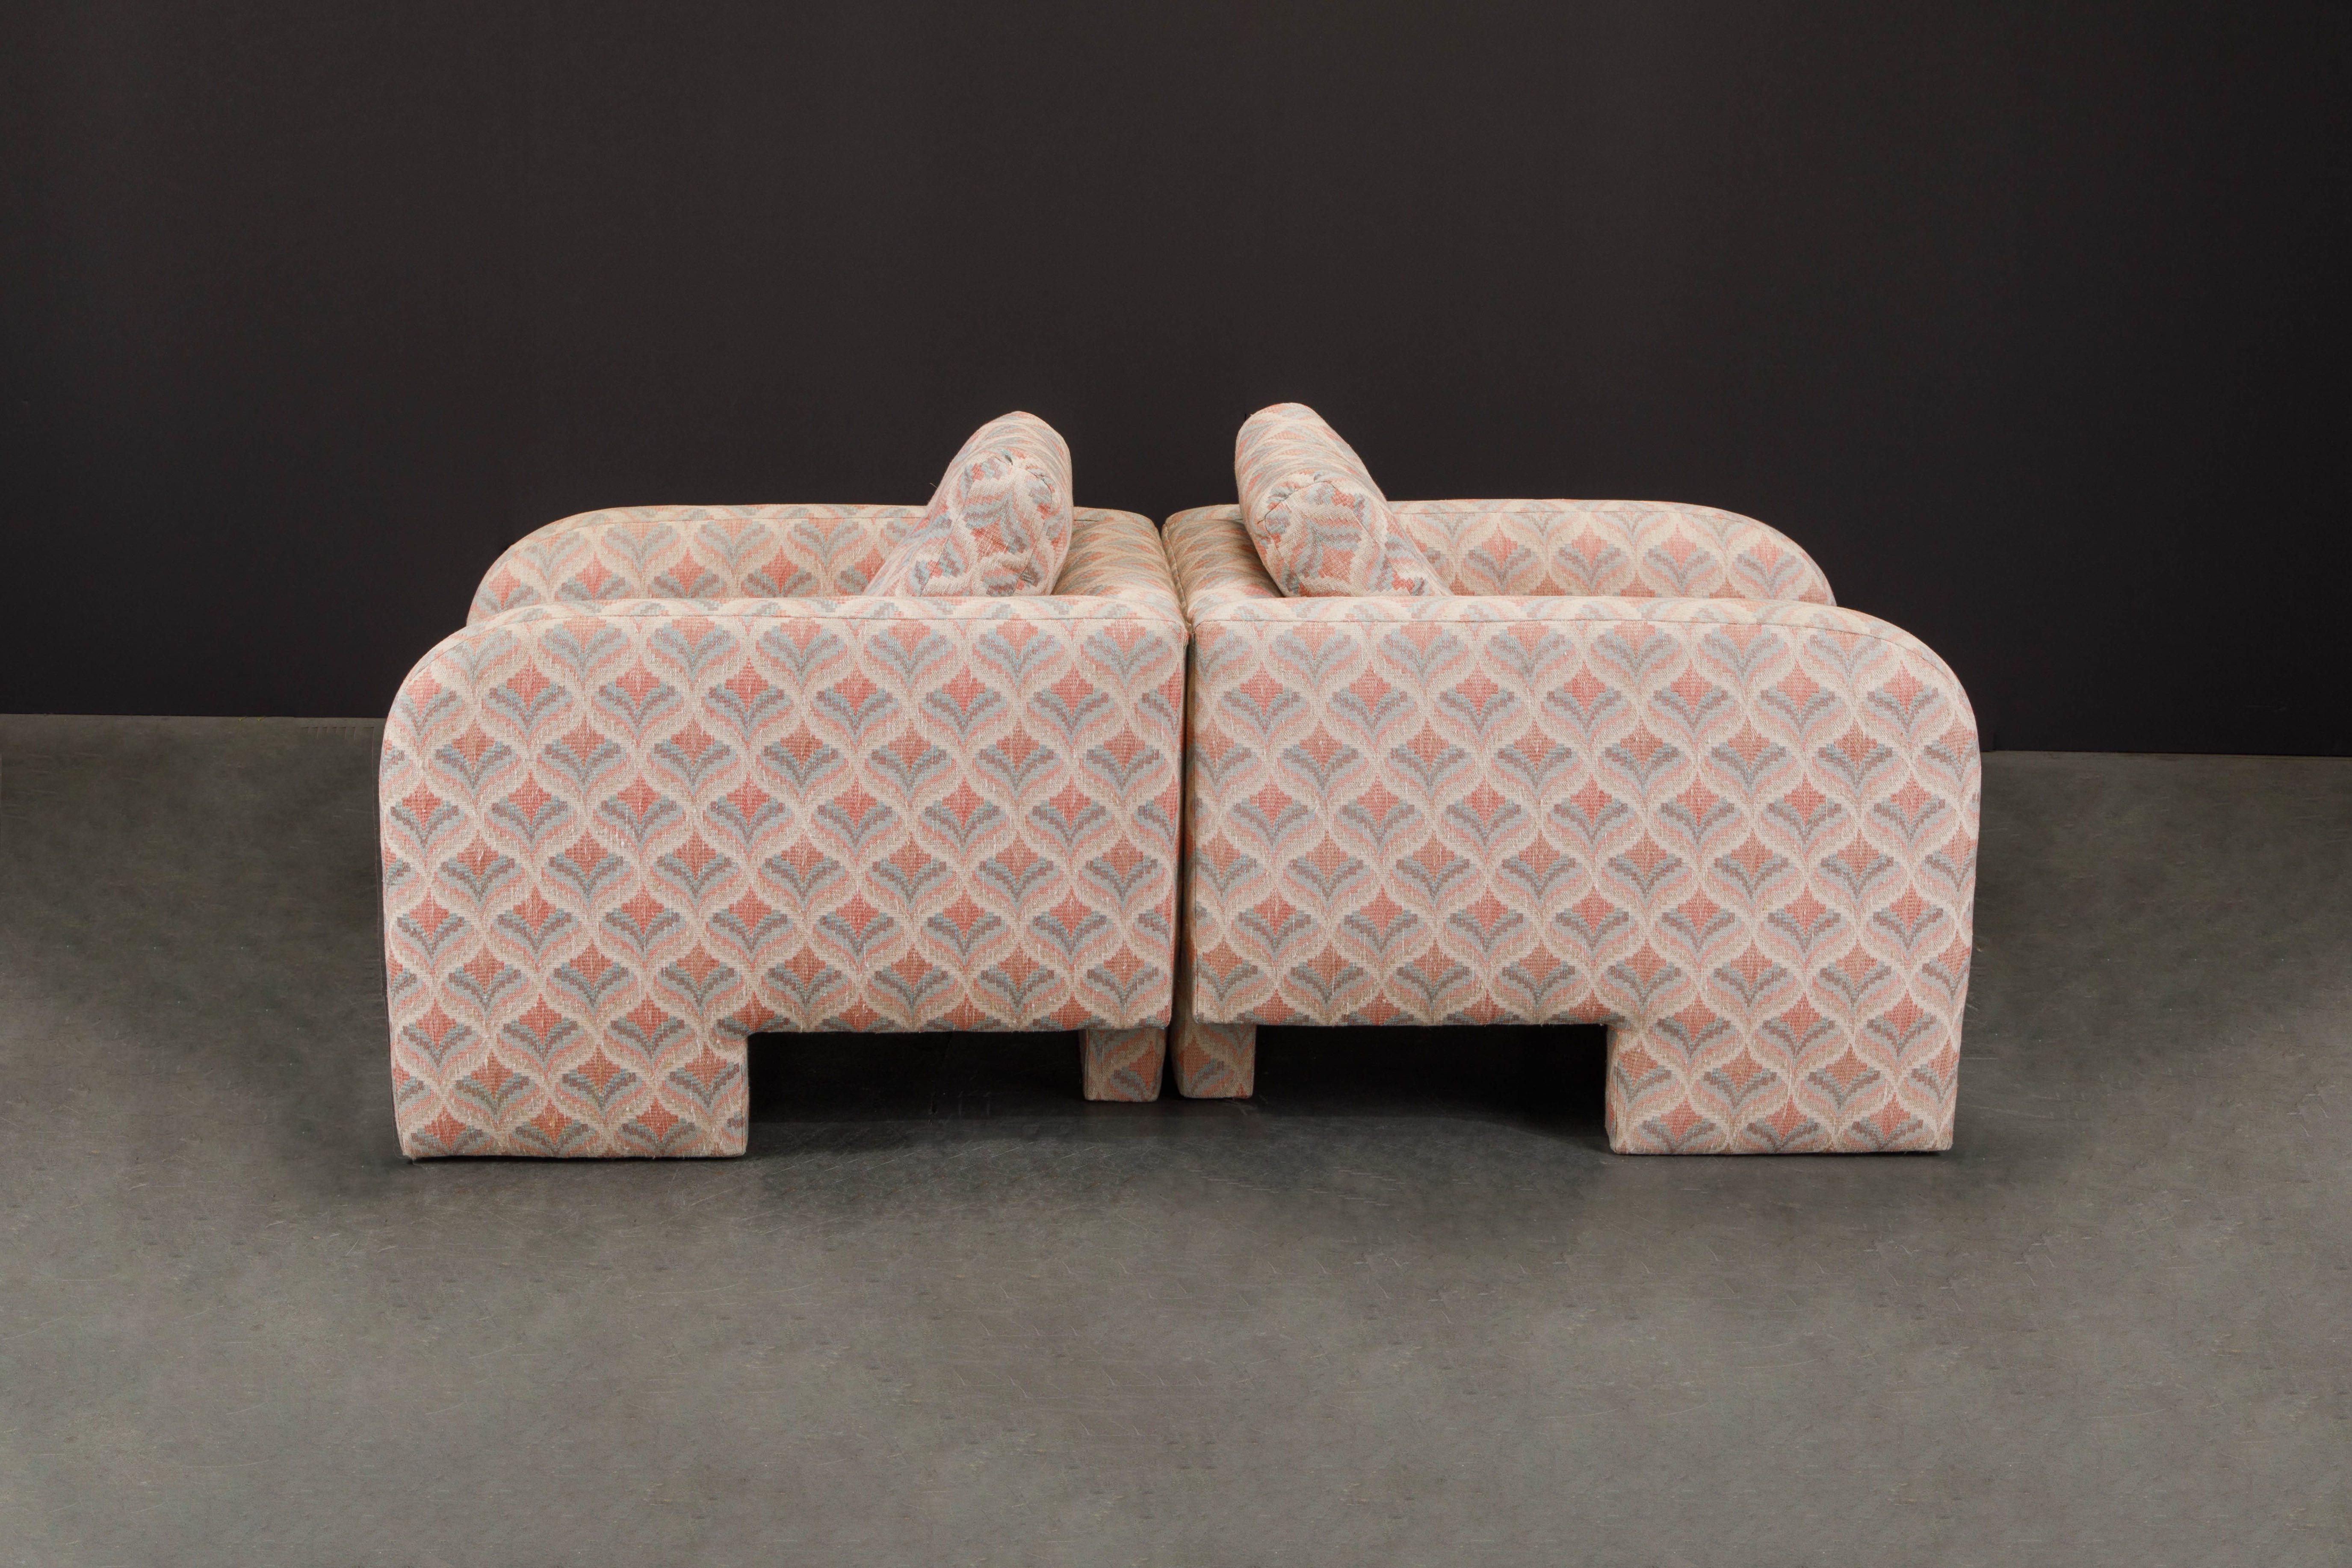 Post-Modern Channel Tufted Lounge Chairs, Attributed to Vladimir Kagan, 1980s In Good Condition For Sale In Los Angeles, CA